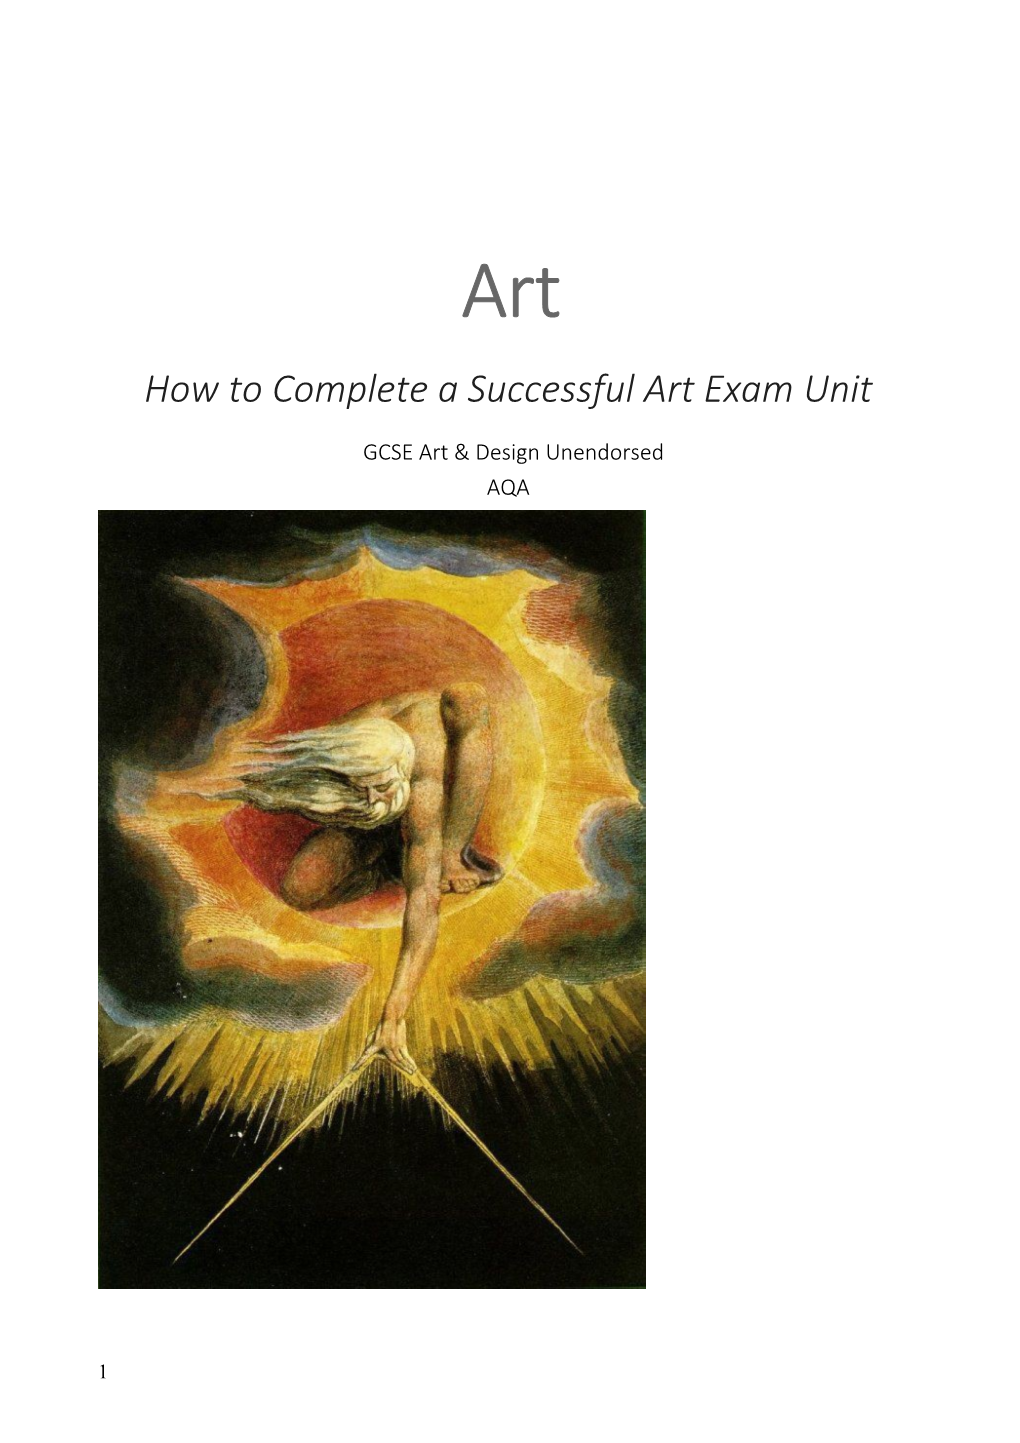 How to Complete a Successful Art Exam Unit